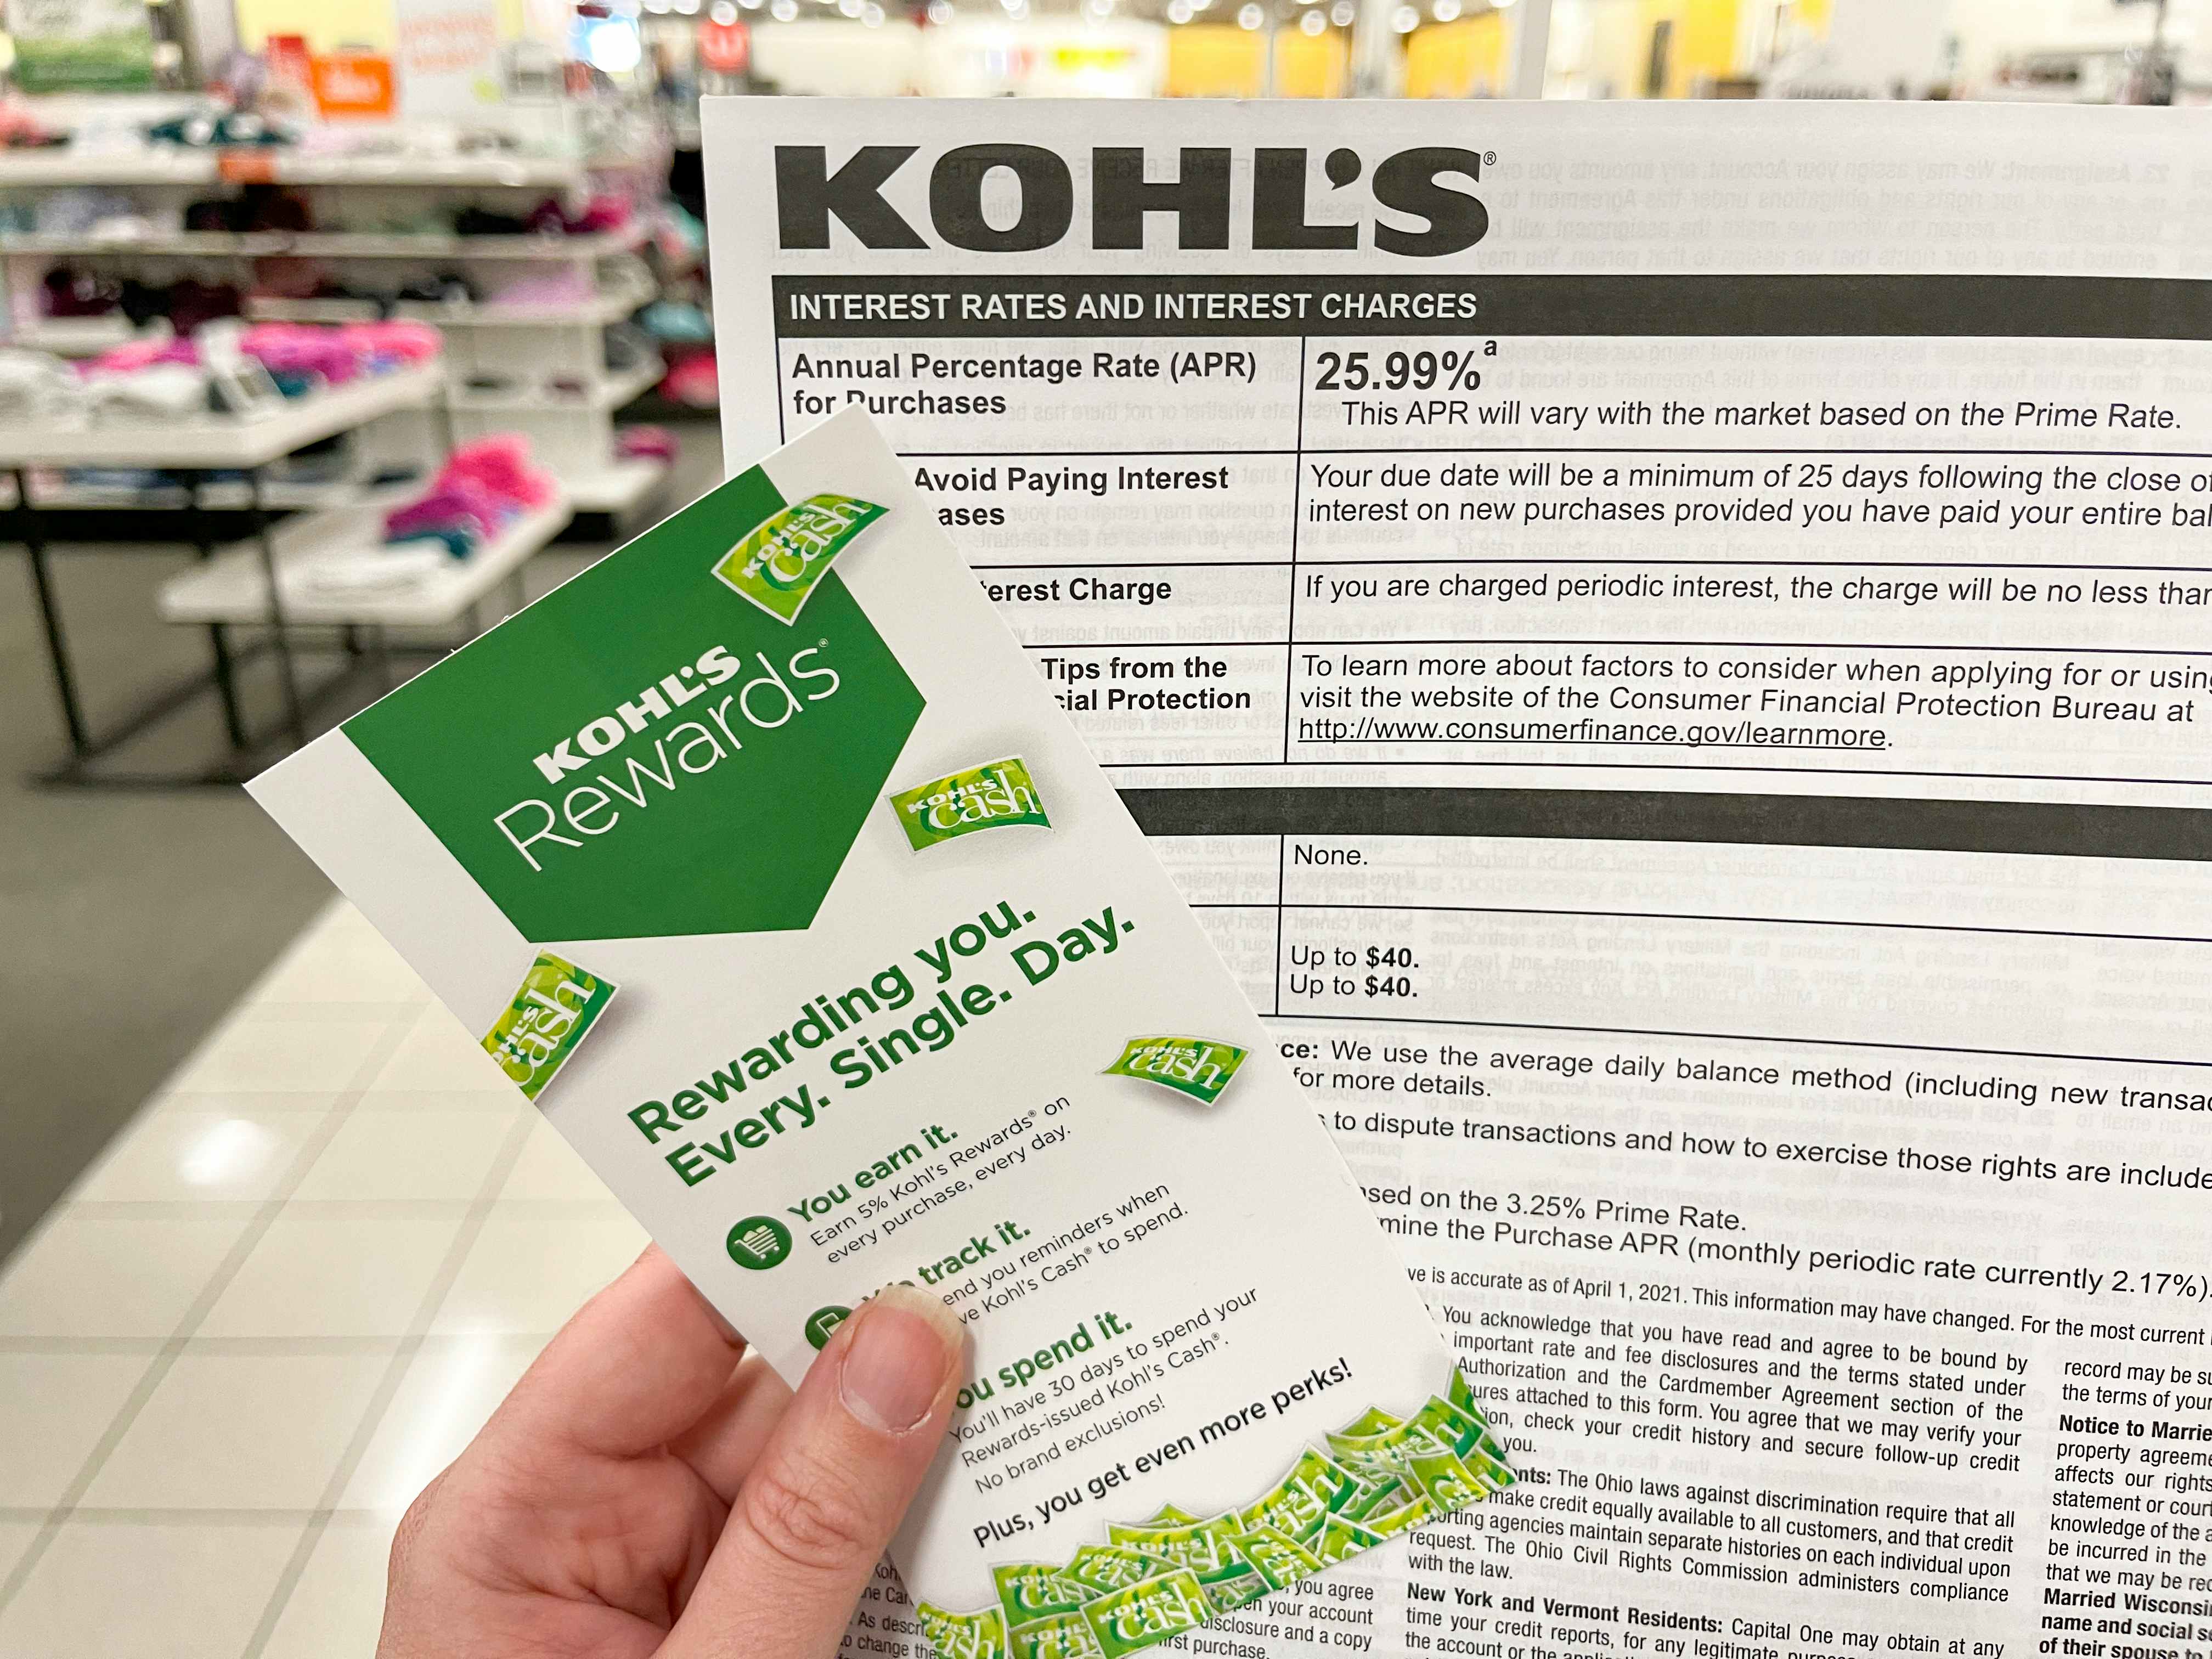 Kohl's Hidden Clearance: Find the best deals to resell on